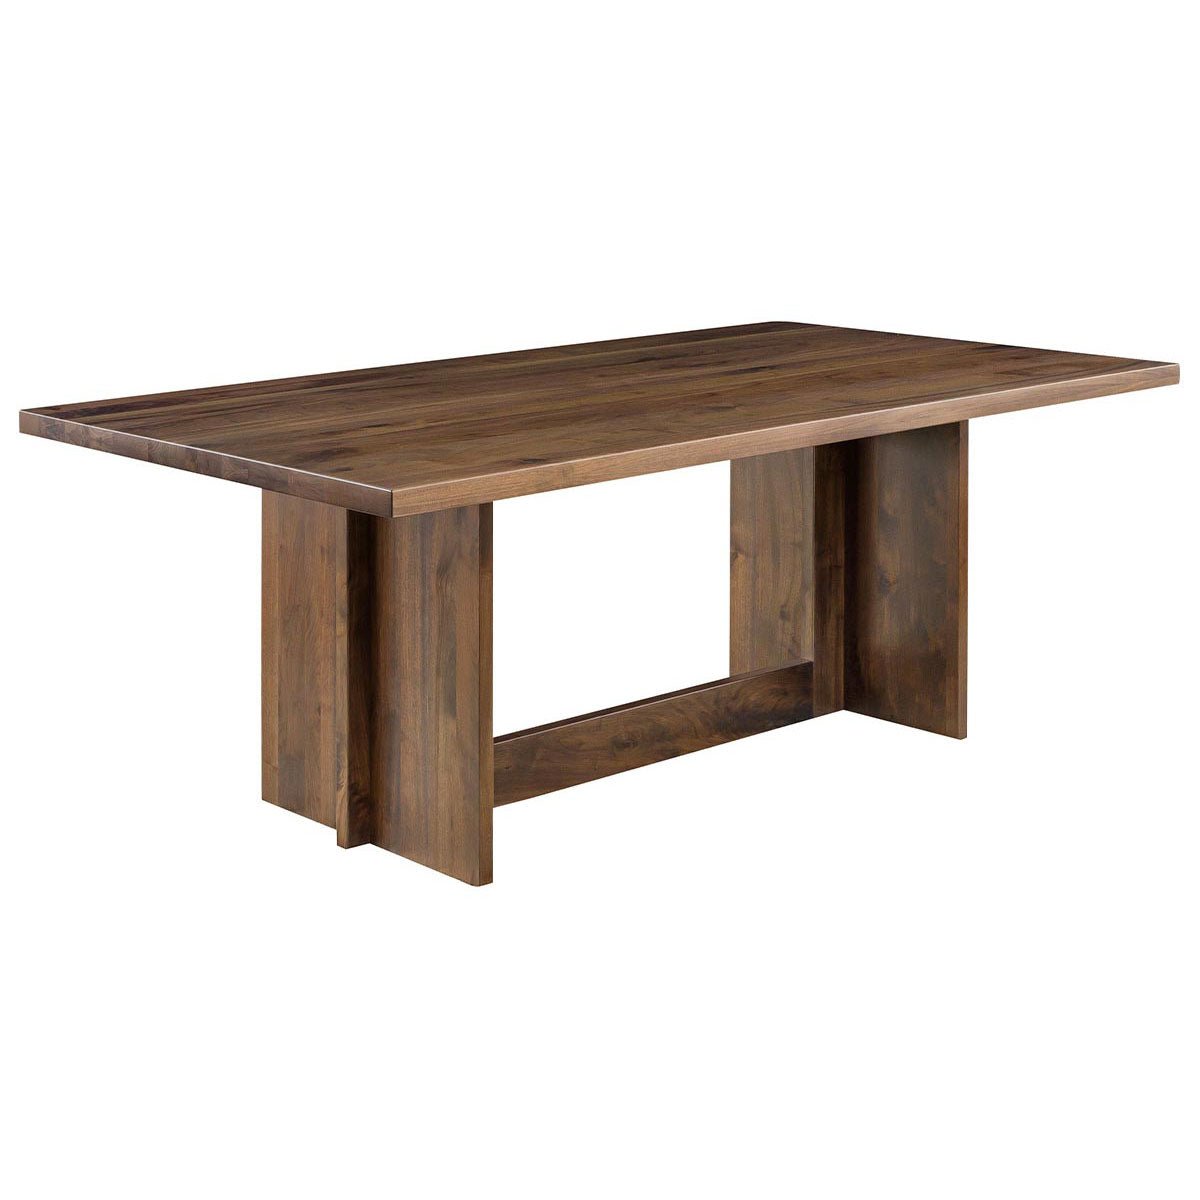 Sophia Amish Dining Room Table - snyders.furniture